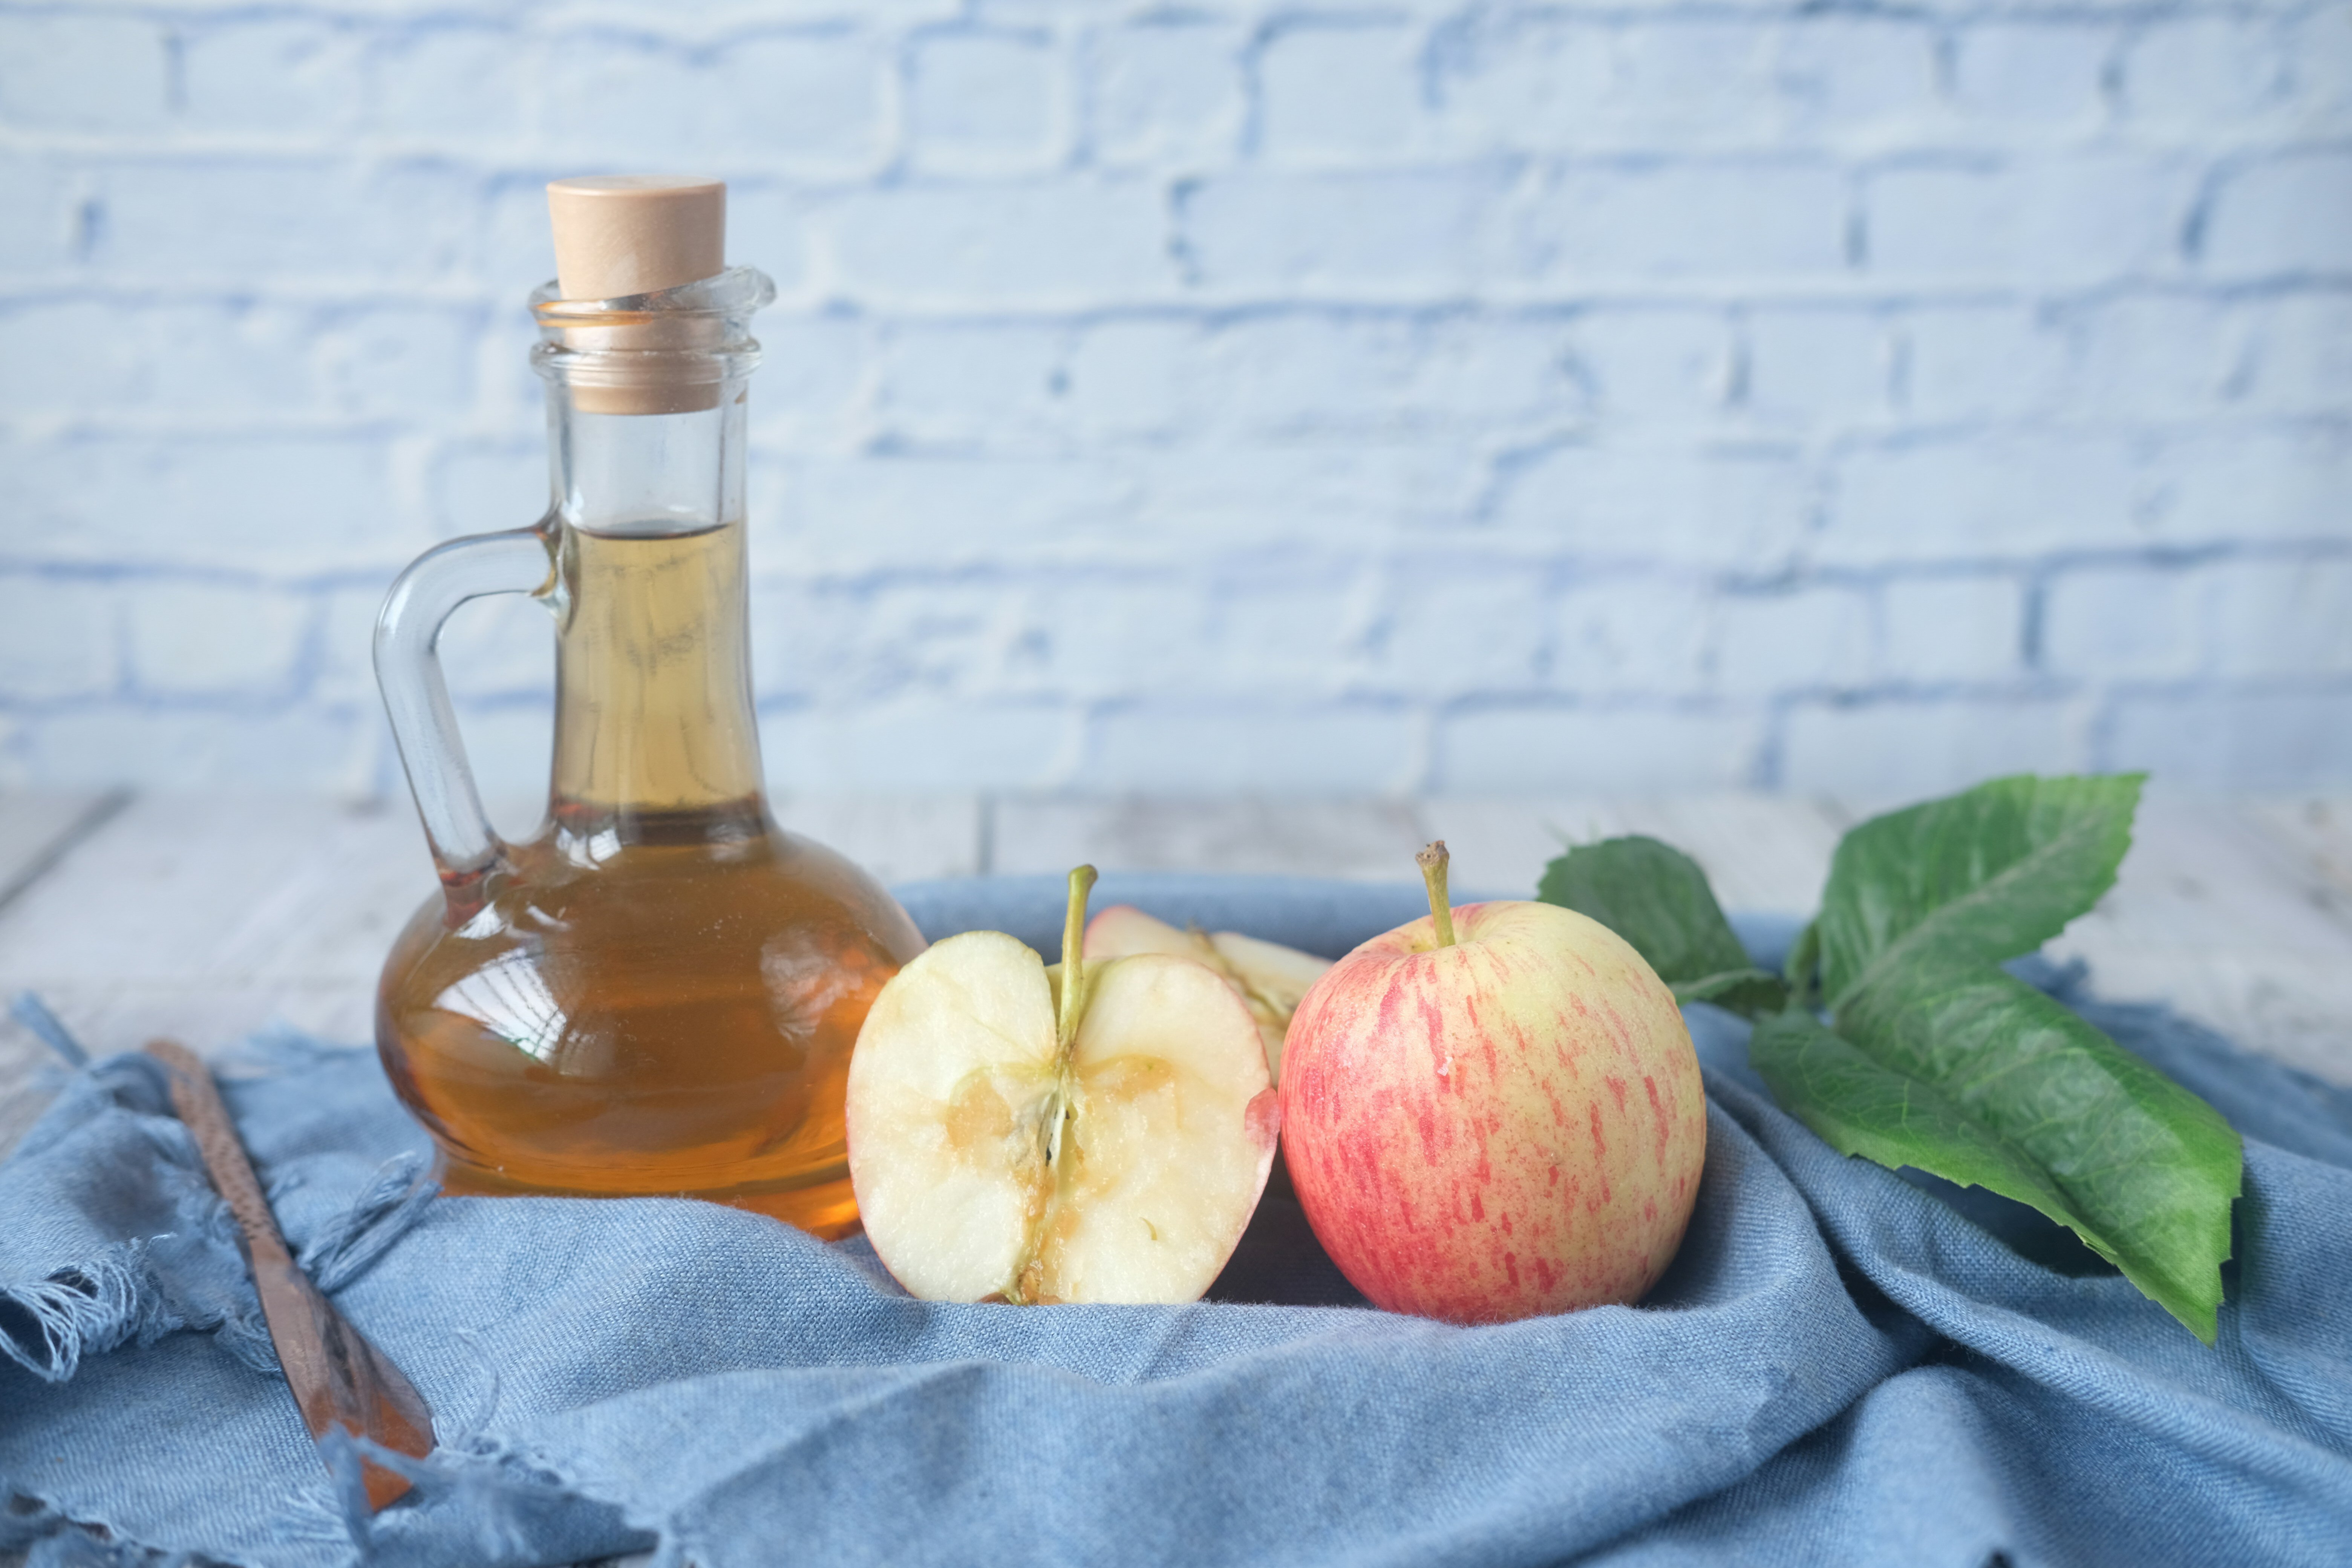 Apple cider vinegar is not a magic potion that helps with weight loss